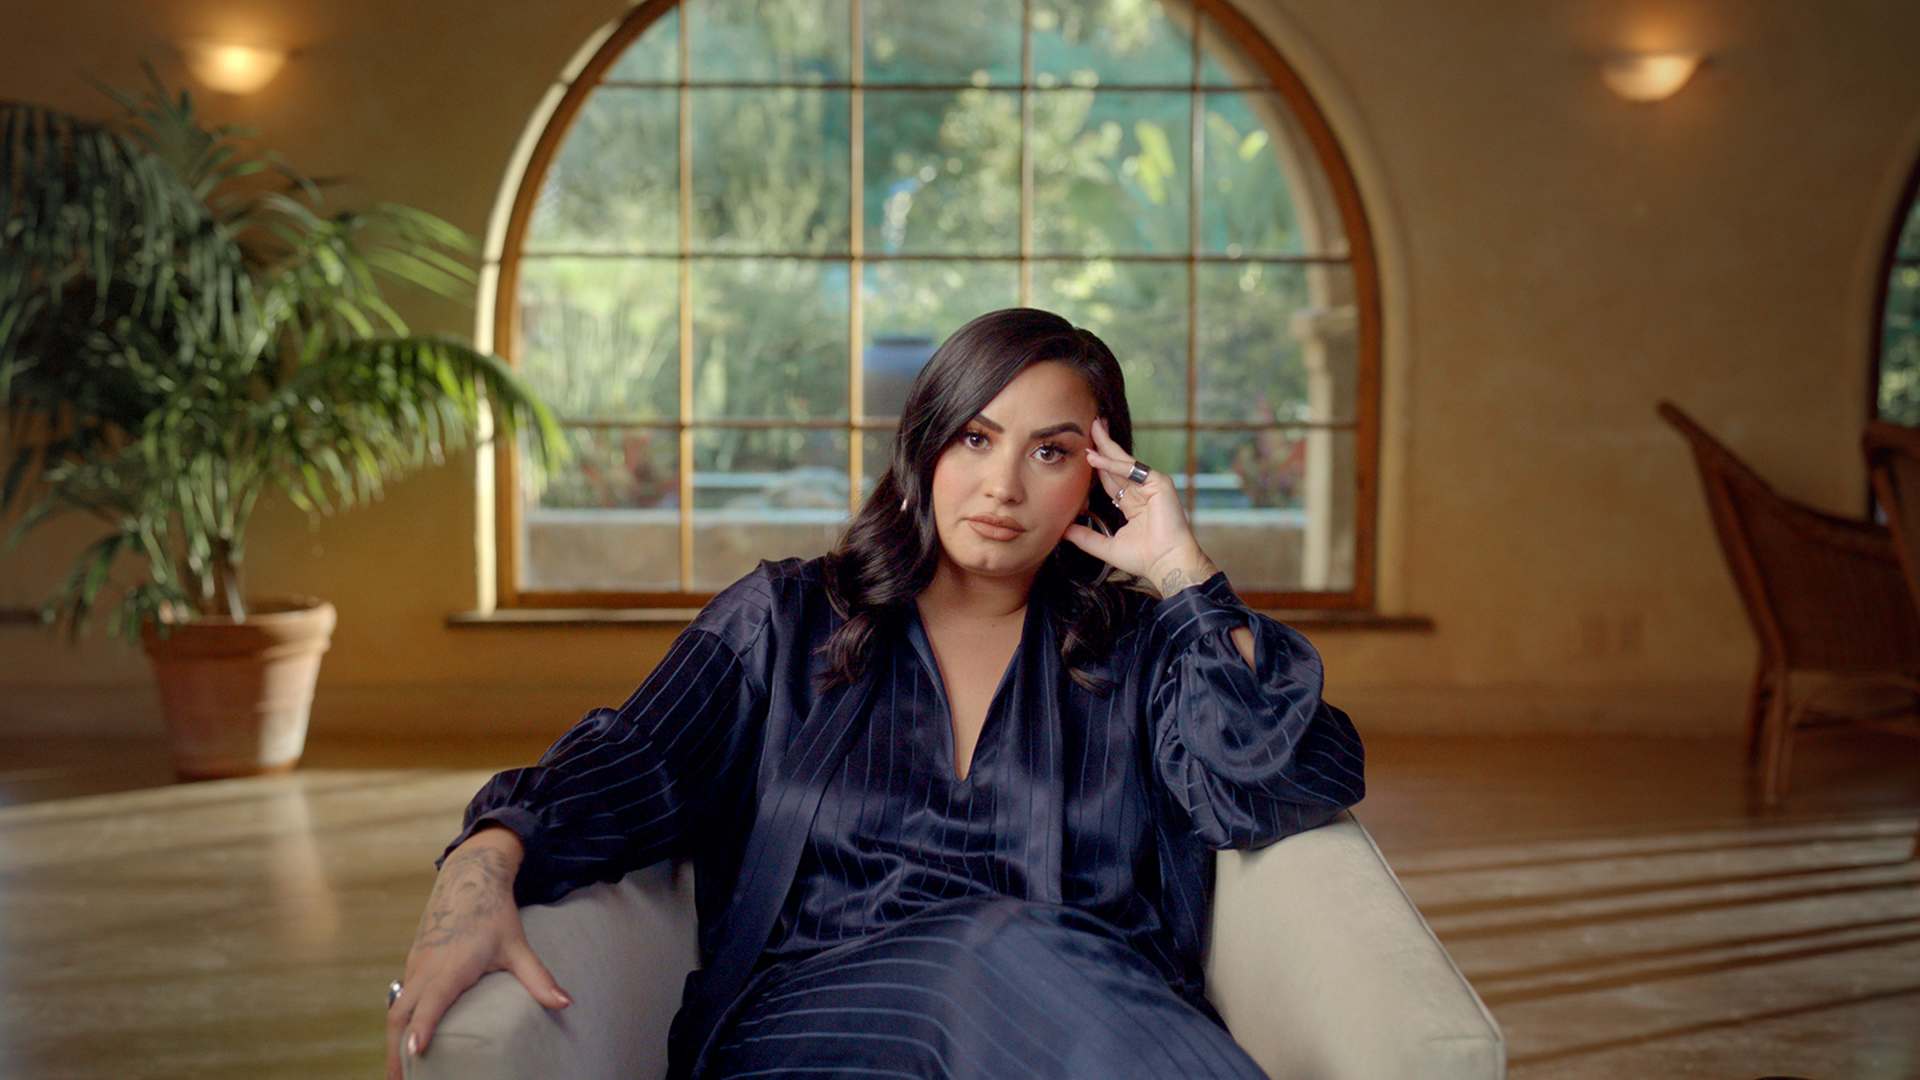 Demi Lovato's "Dancing with the Devil" Episode 3 on YouTube: Time, What to expect